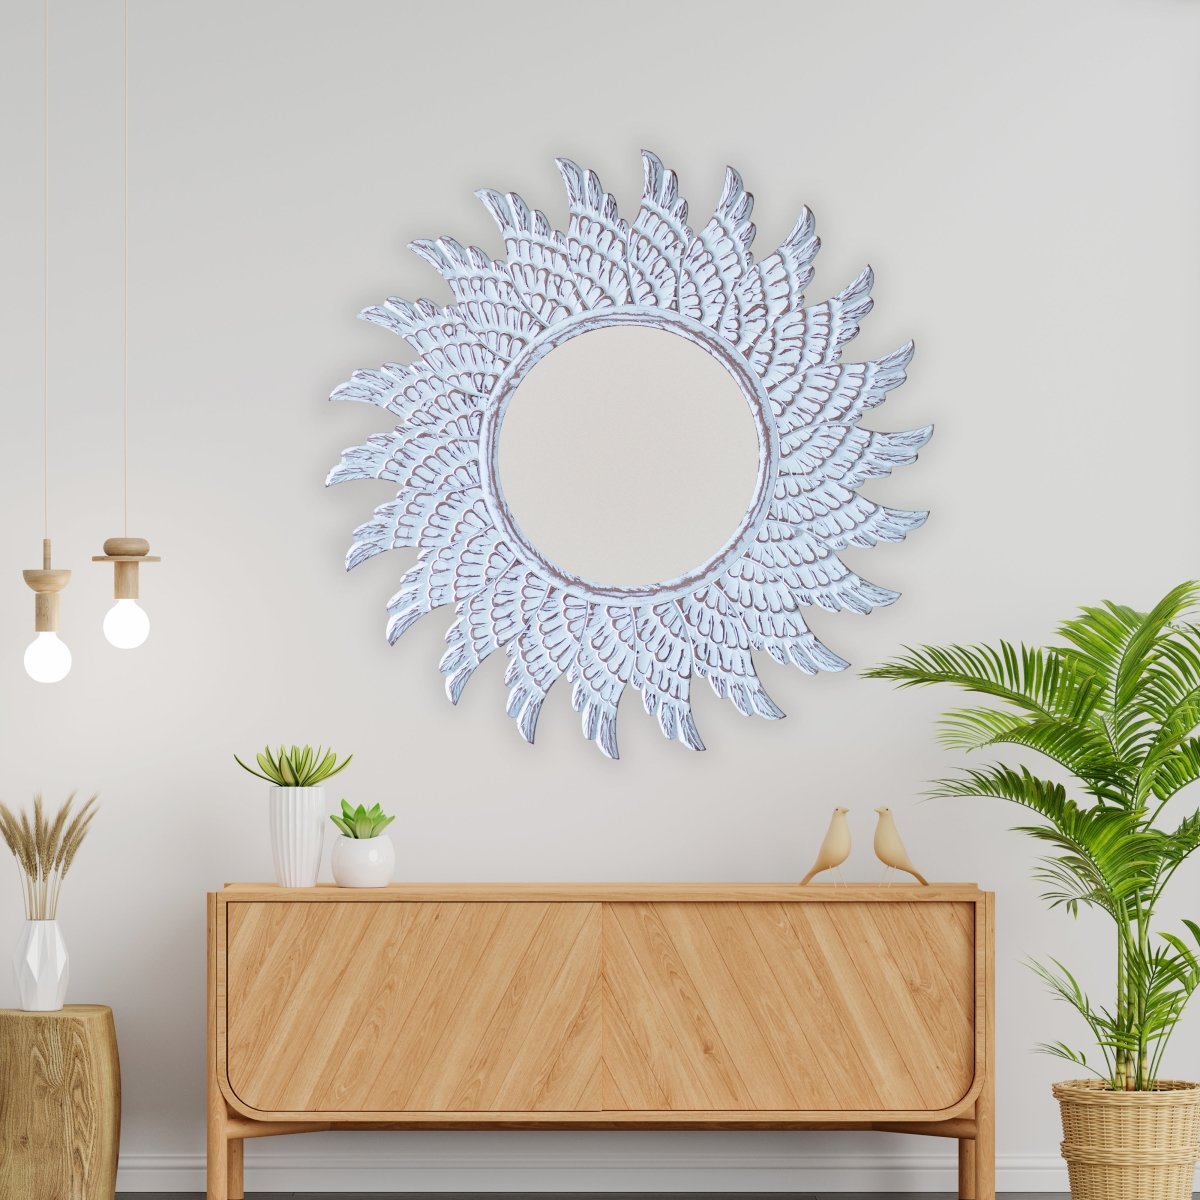 Kezevel Wooden Wall Hanging Mirror-Round White Brown Handcrafted Decorative Mirror for Living Room Mirror Frame, Wall Mirror